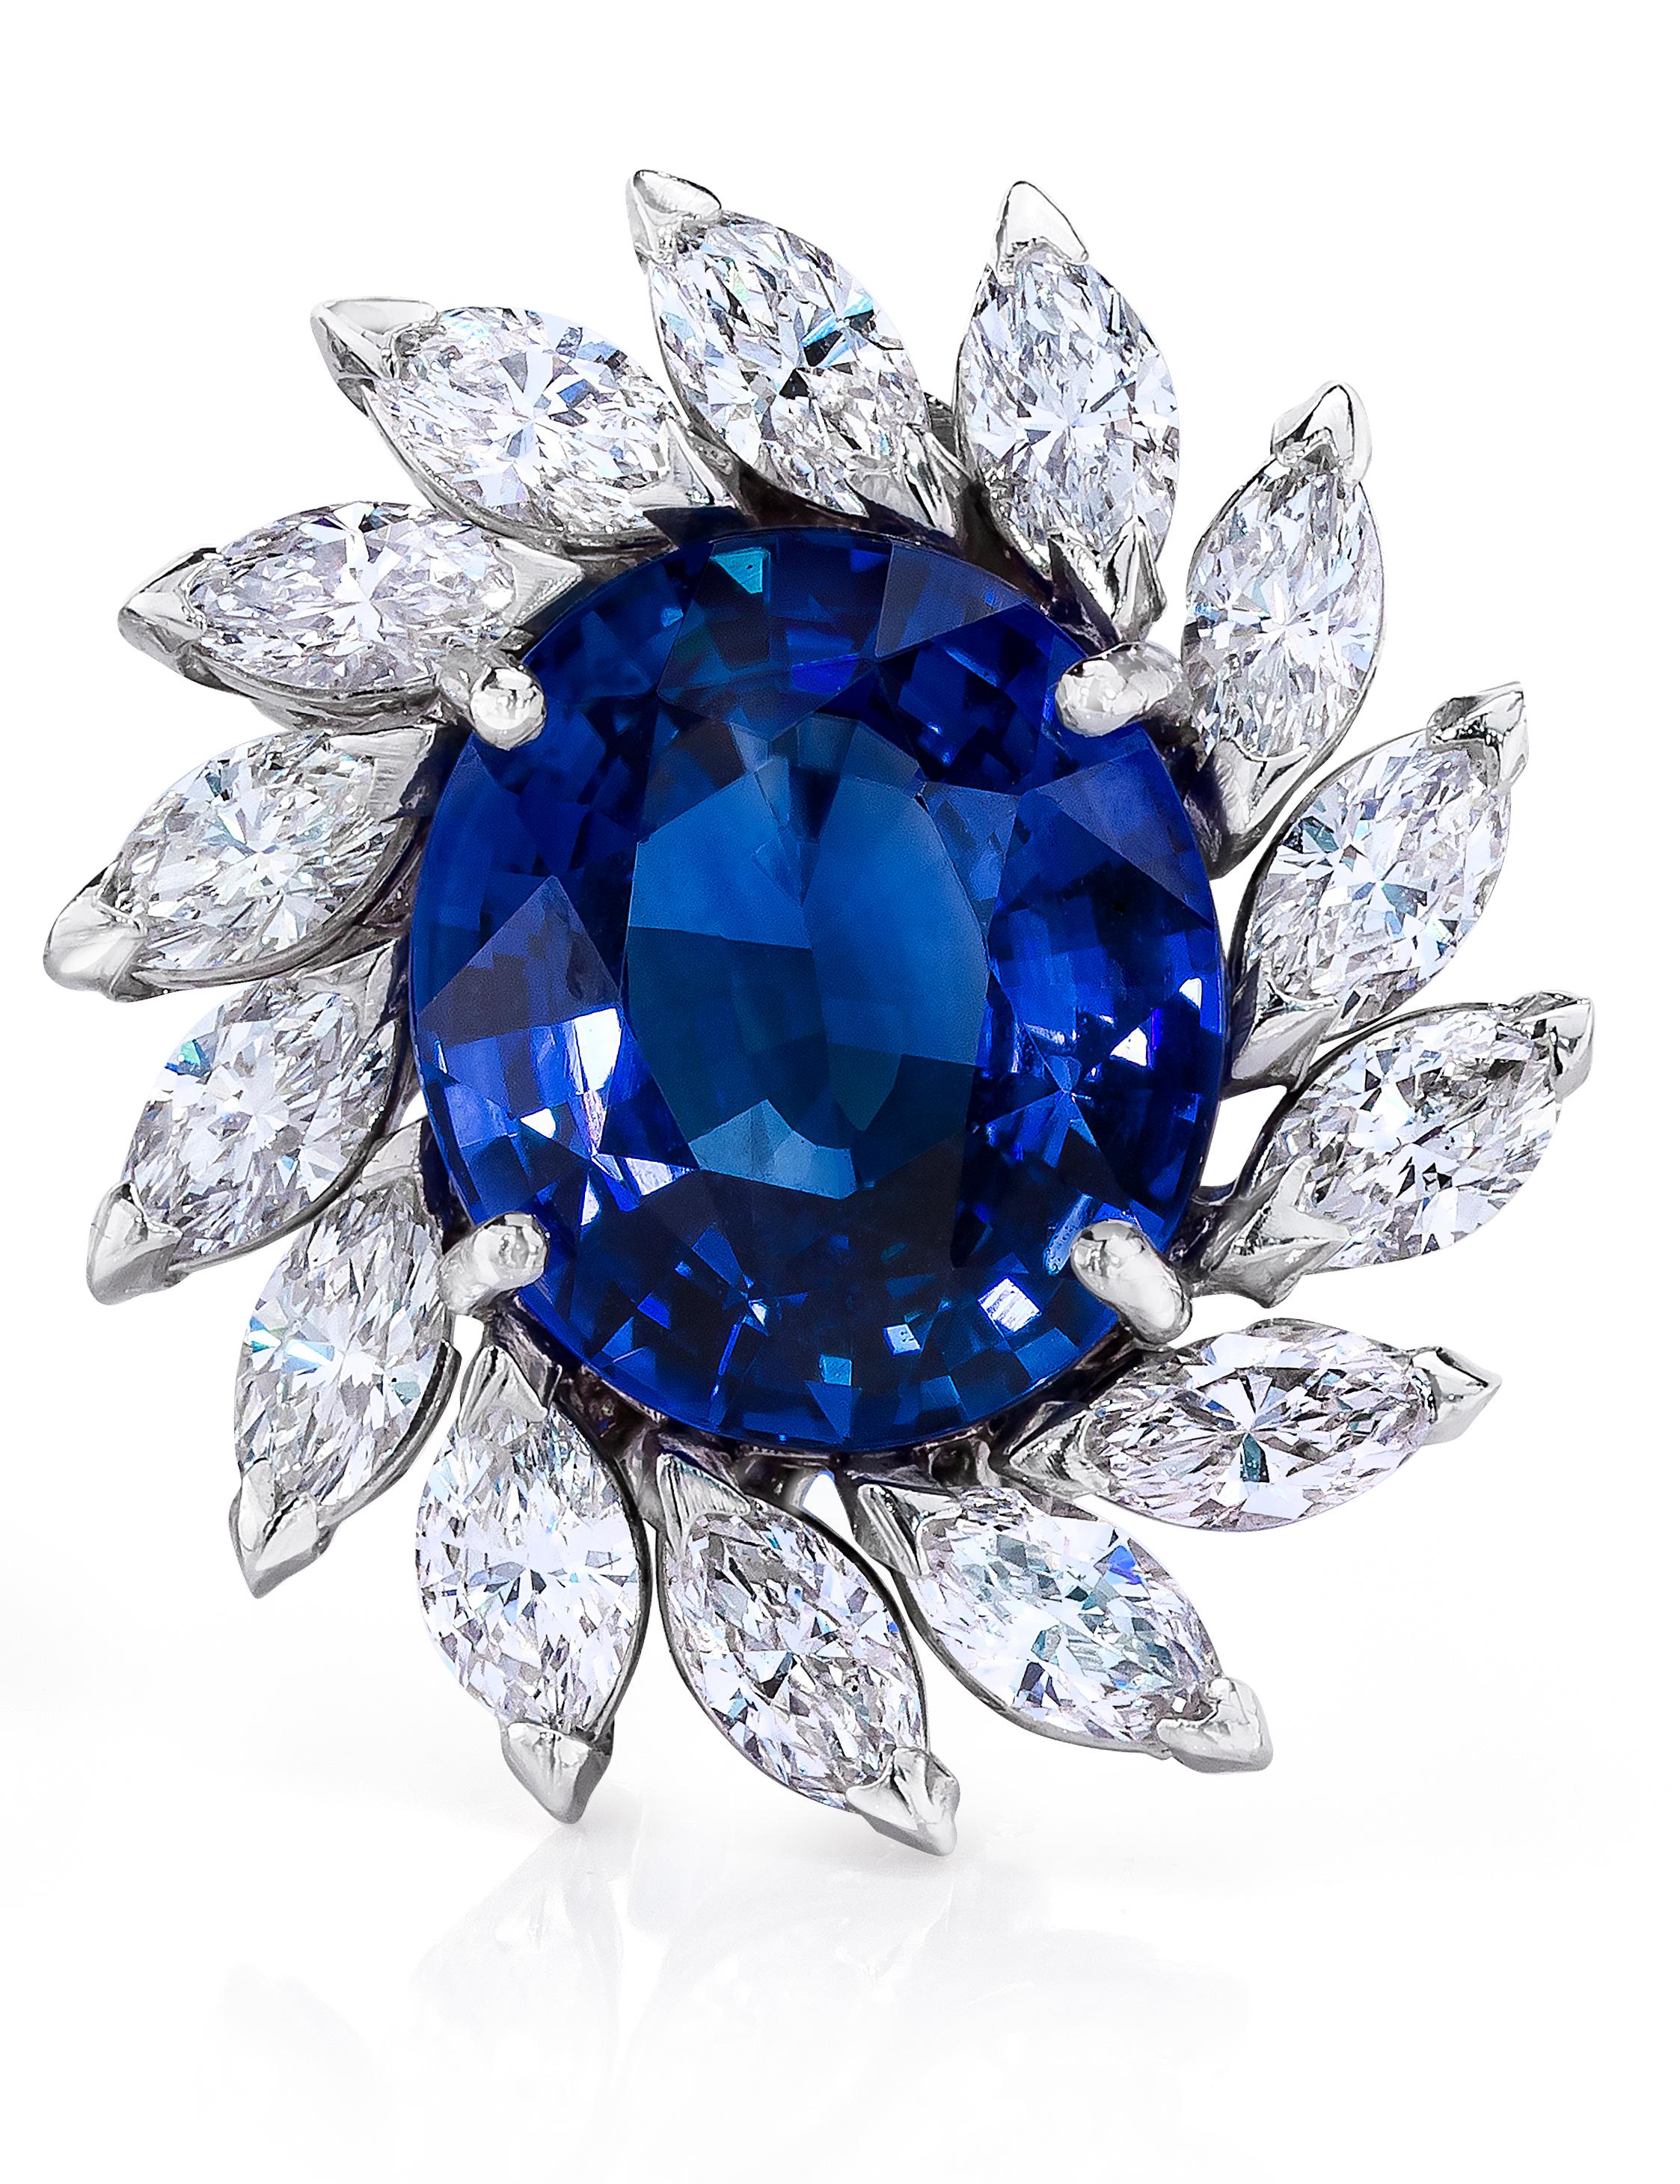 Ceylon Oval Shaped Sapphires weighing 8.90 Carats surrounded by Marquise Cut Diamonds weighing 2.26 Carats.
Set in 18 Karat White Gold.